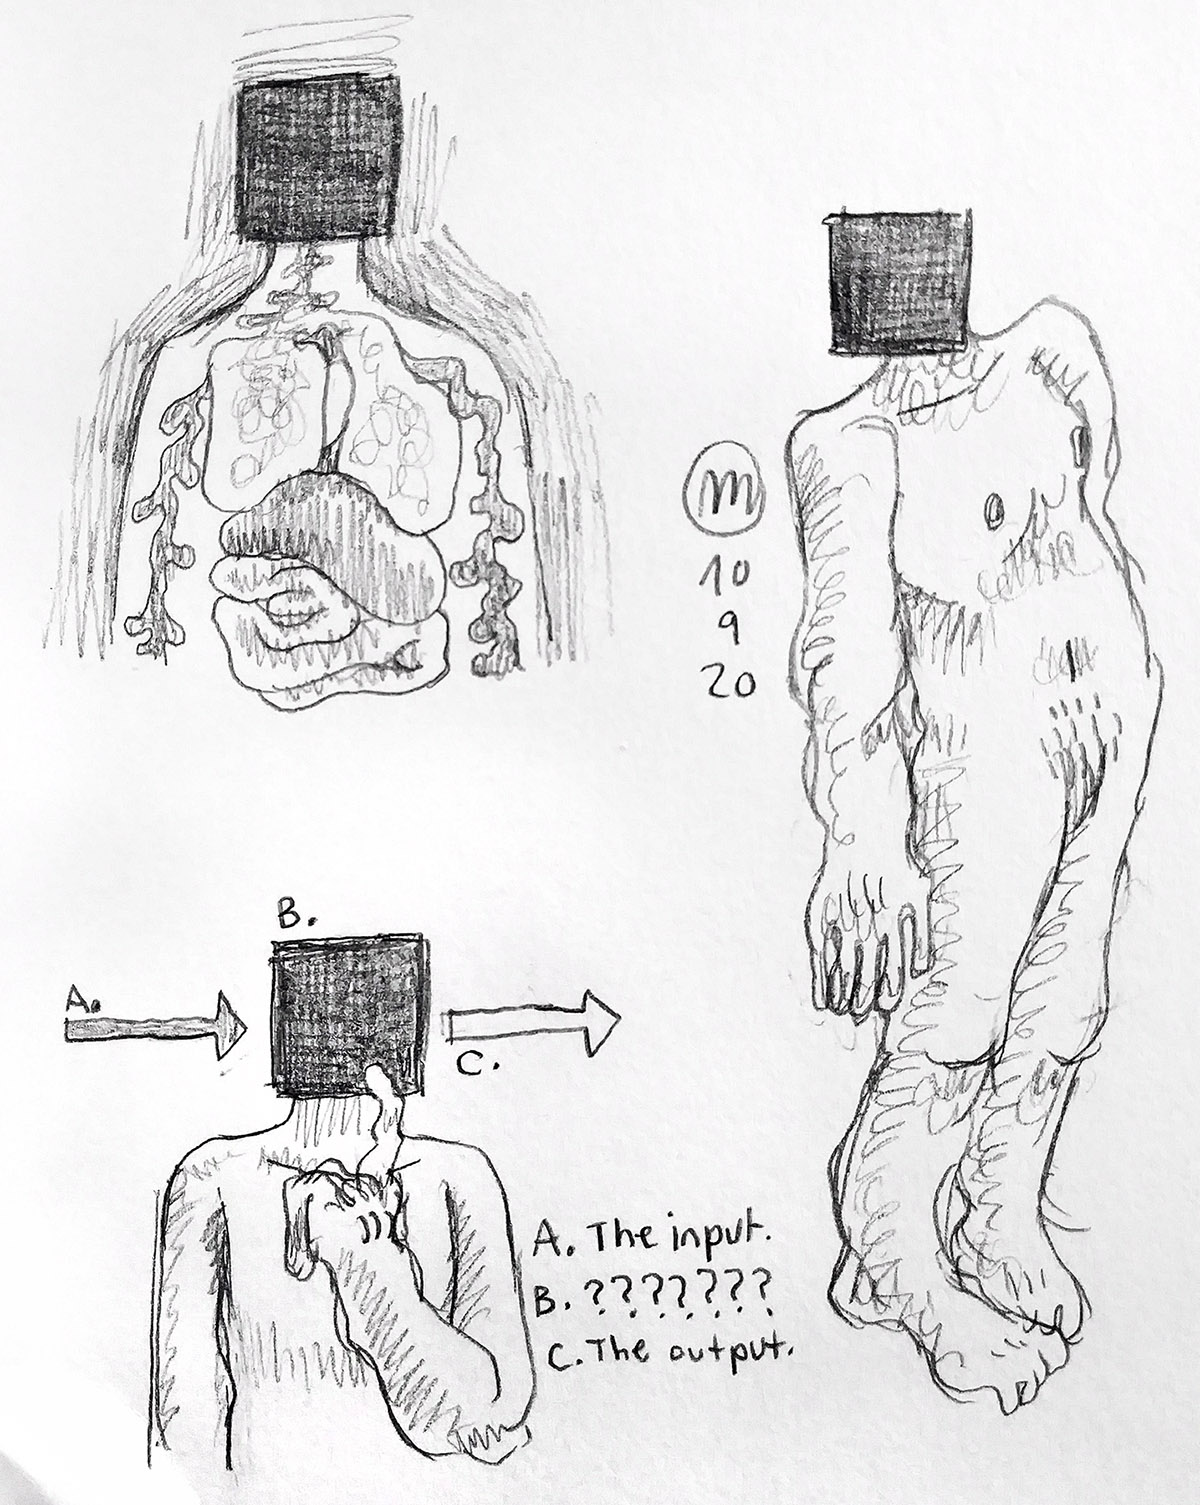 Three drawings of various nude human figures with black boxes censoring their heads.